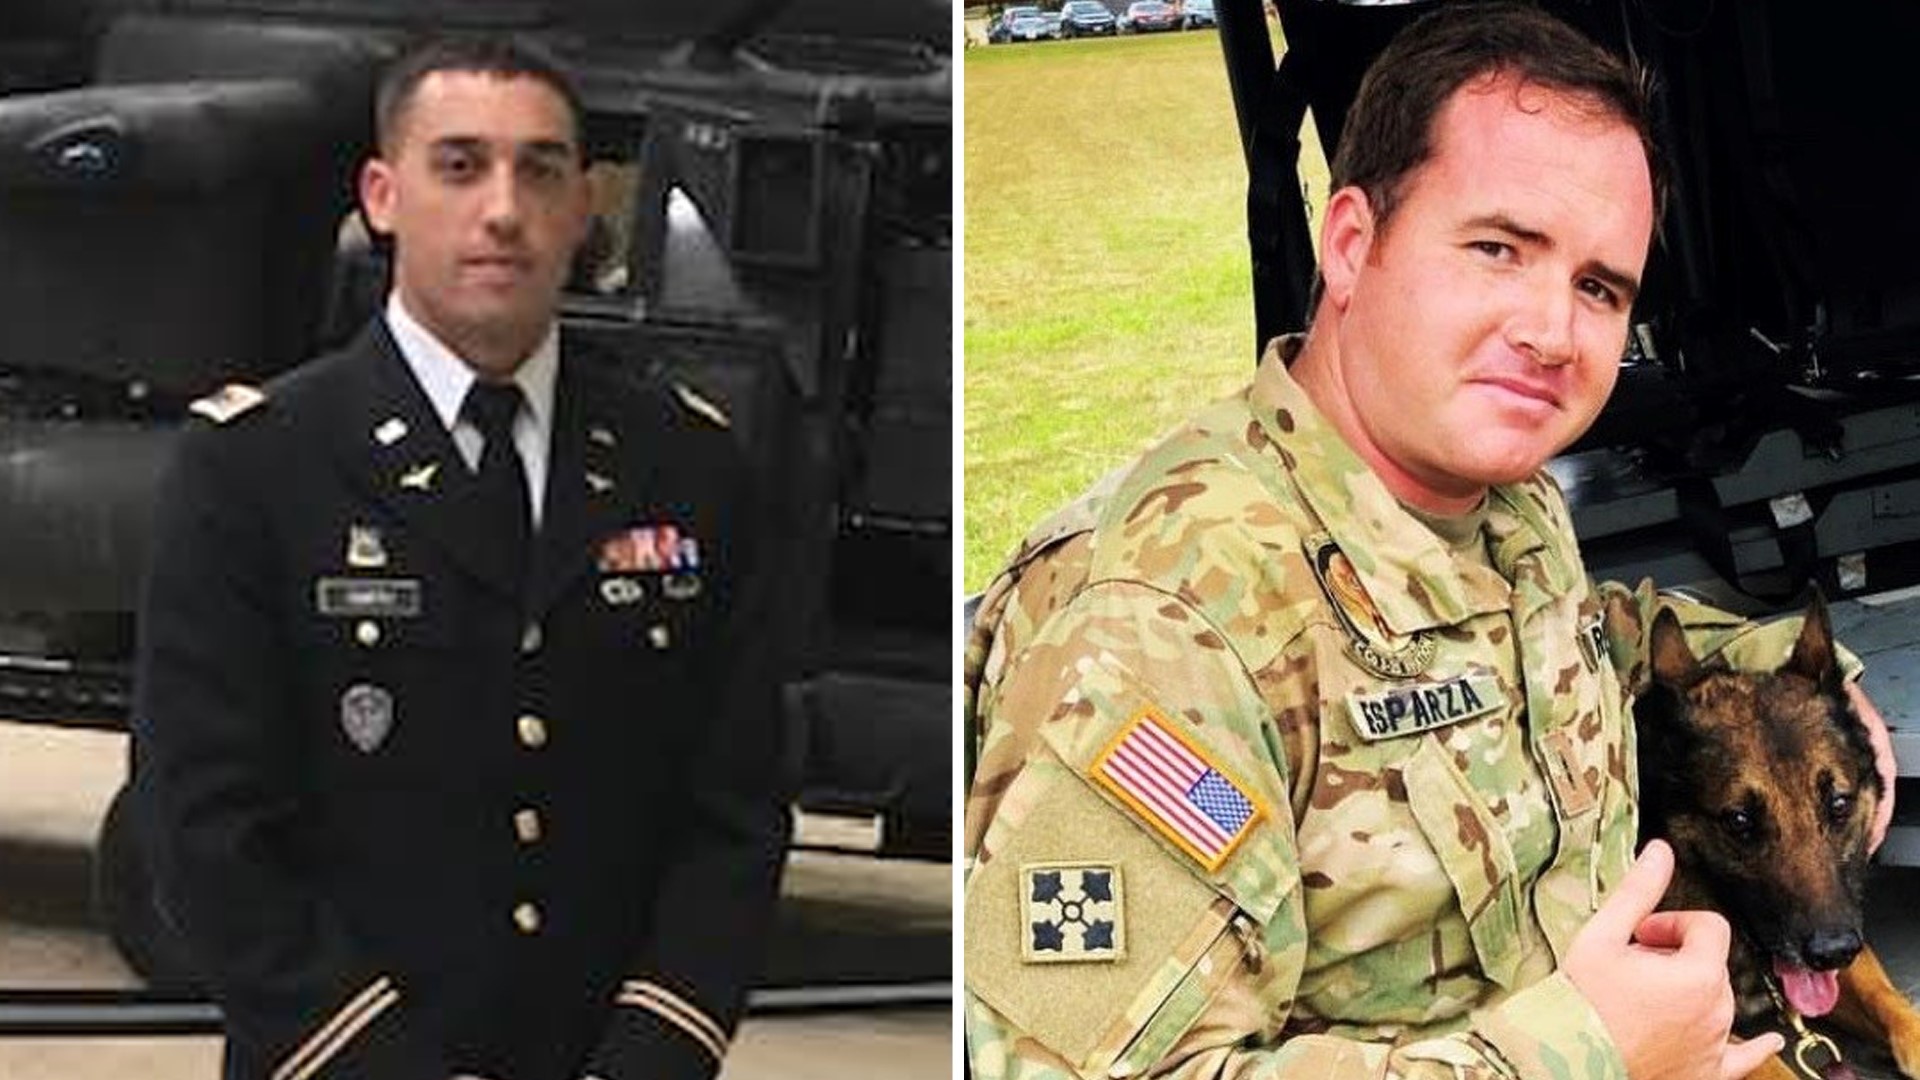 Two of the nine service members who died Wednesday evening in a crash involving two U.S. Army Black Hawk helicopters were from Missouri.